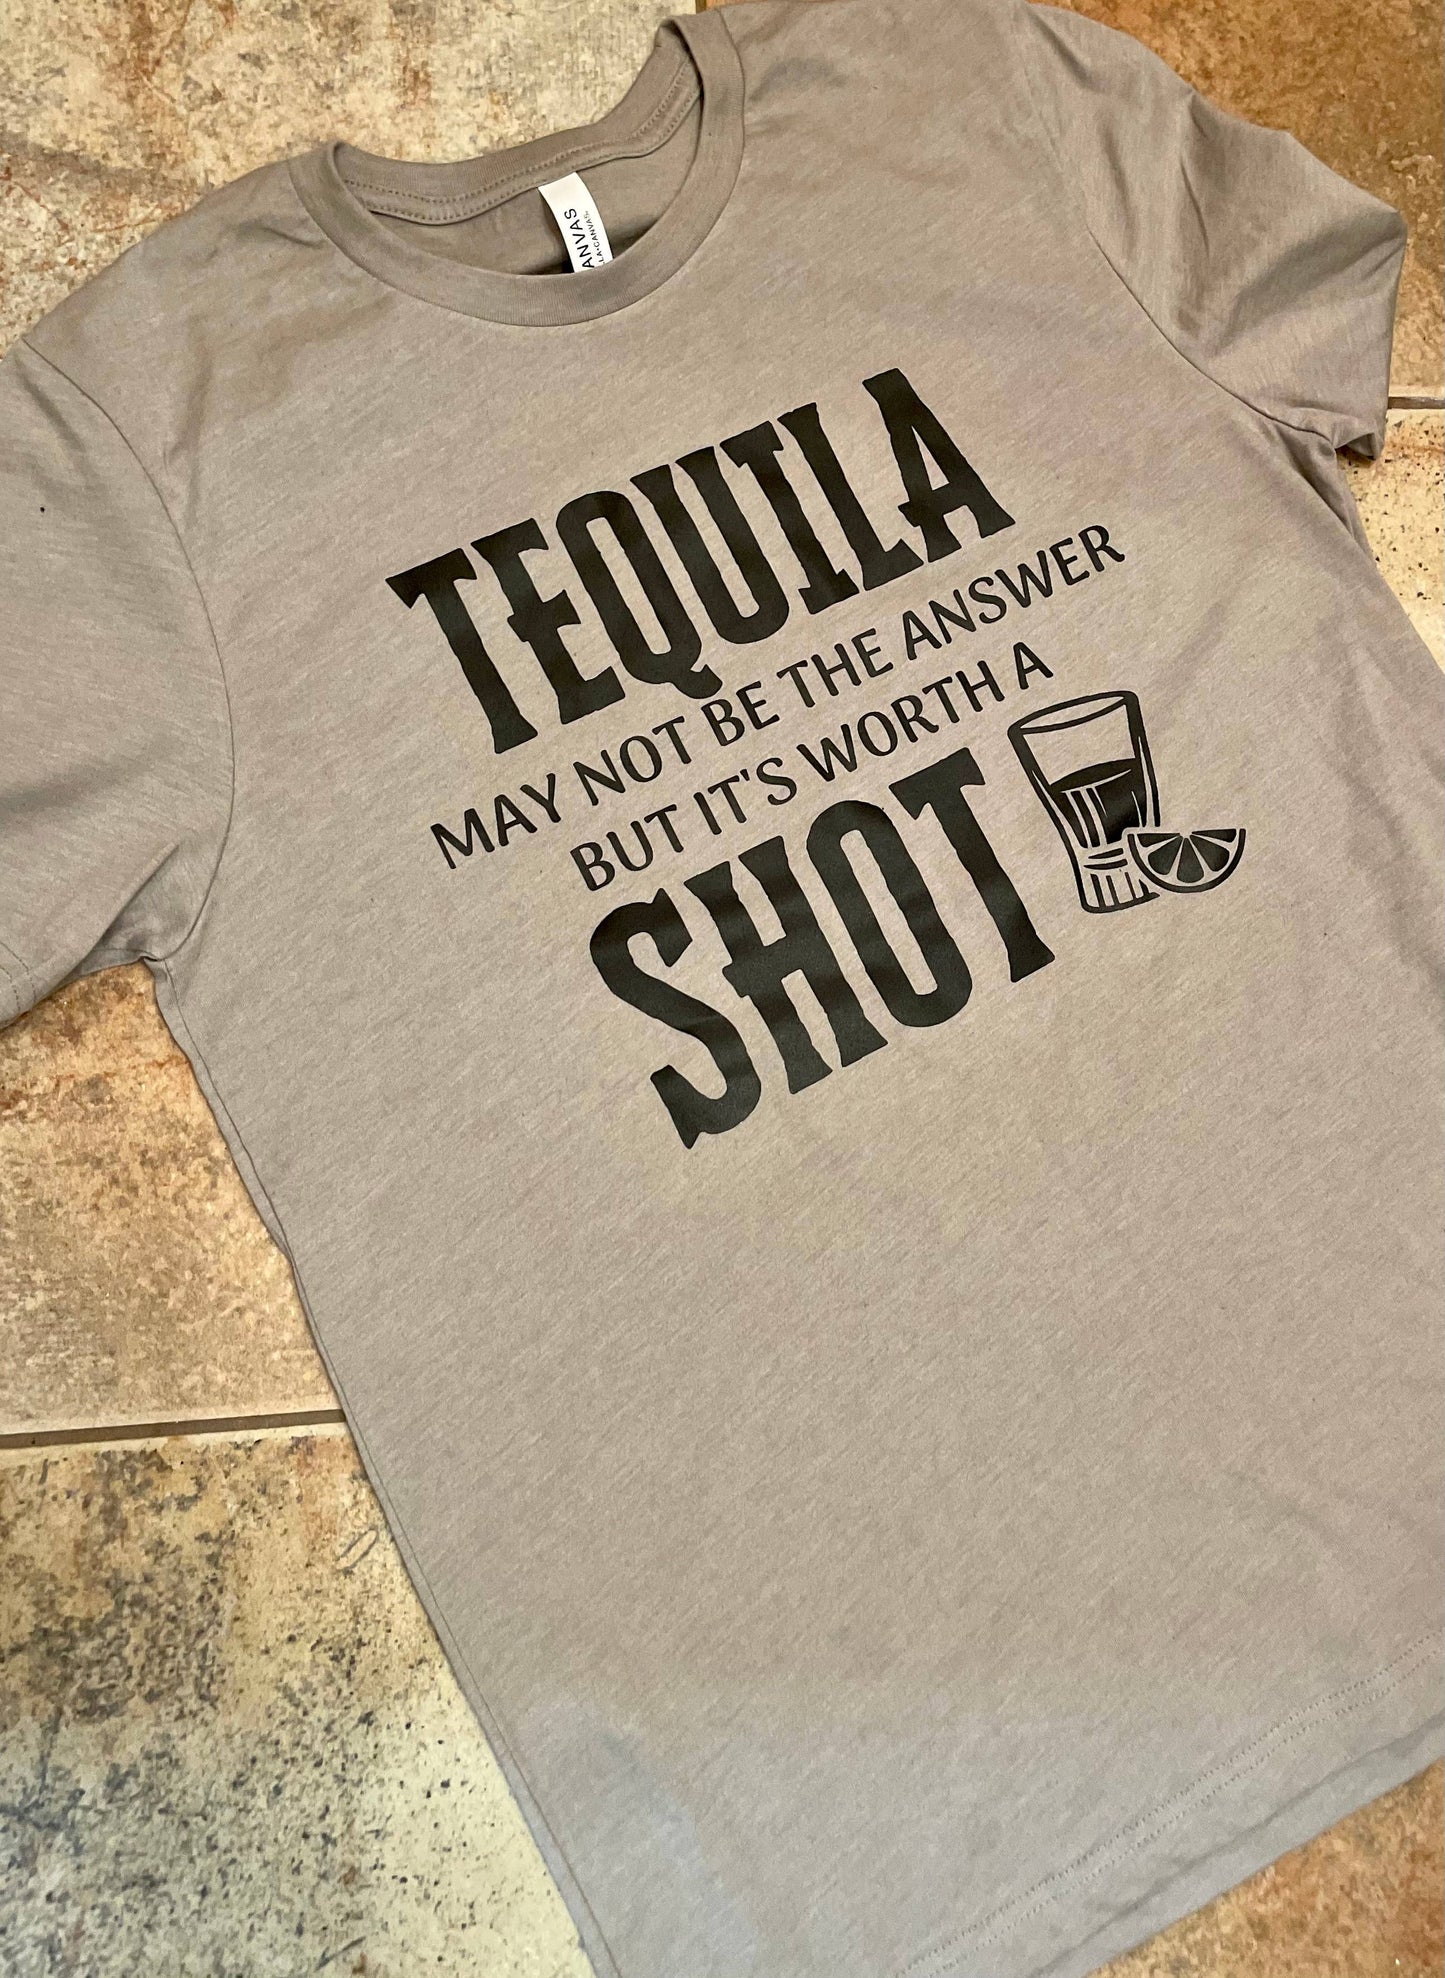 Tequila It's worth a Shot Unisex Tees.